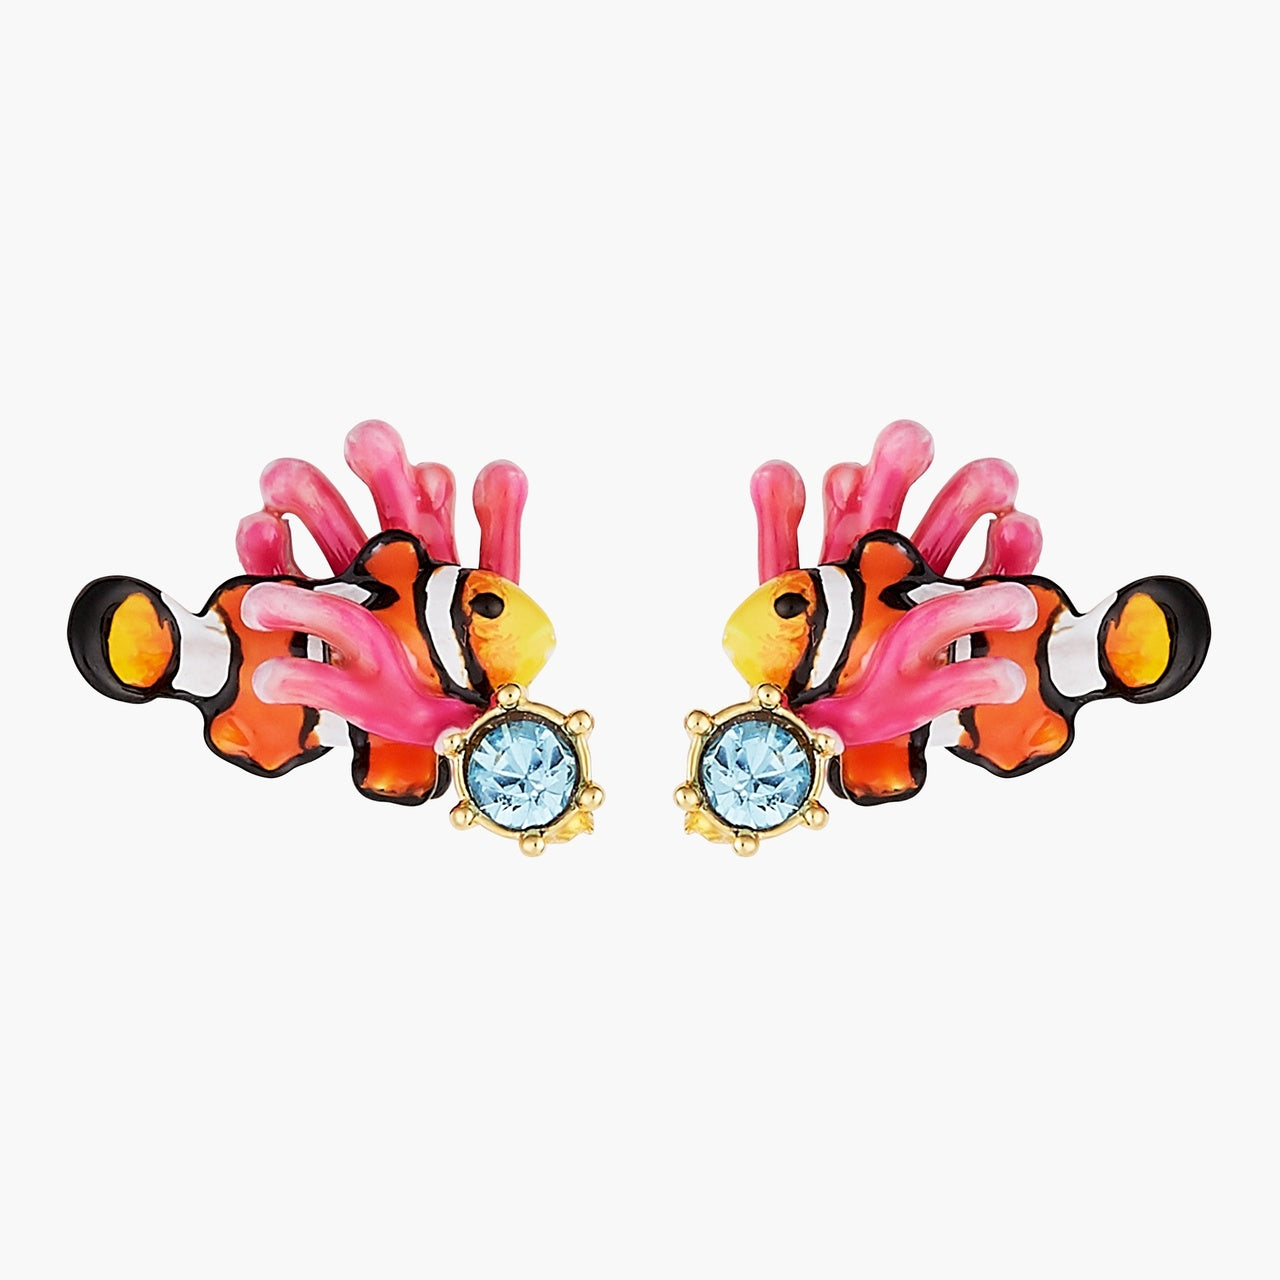 damage of CLOWNFISH, PINK ANEMONE, AND LIGHT BLUE FACETED GLASS POST EARRINGS